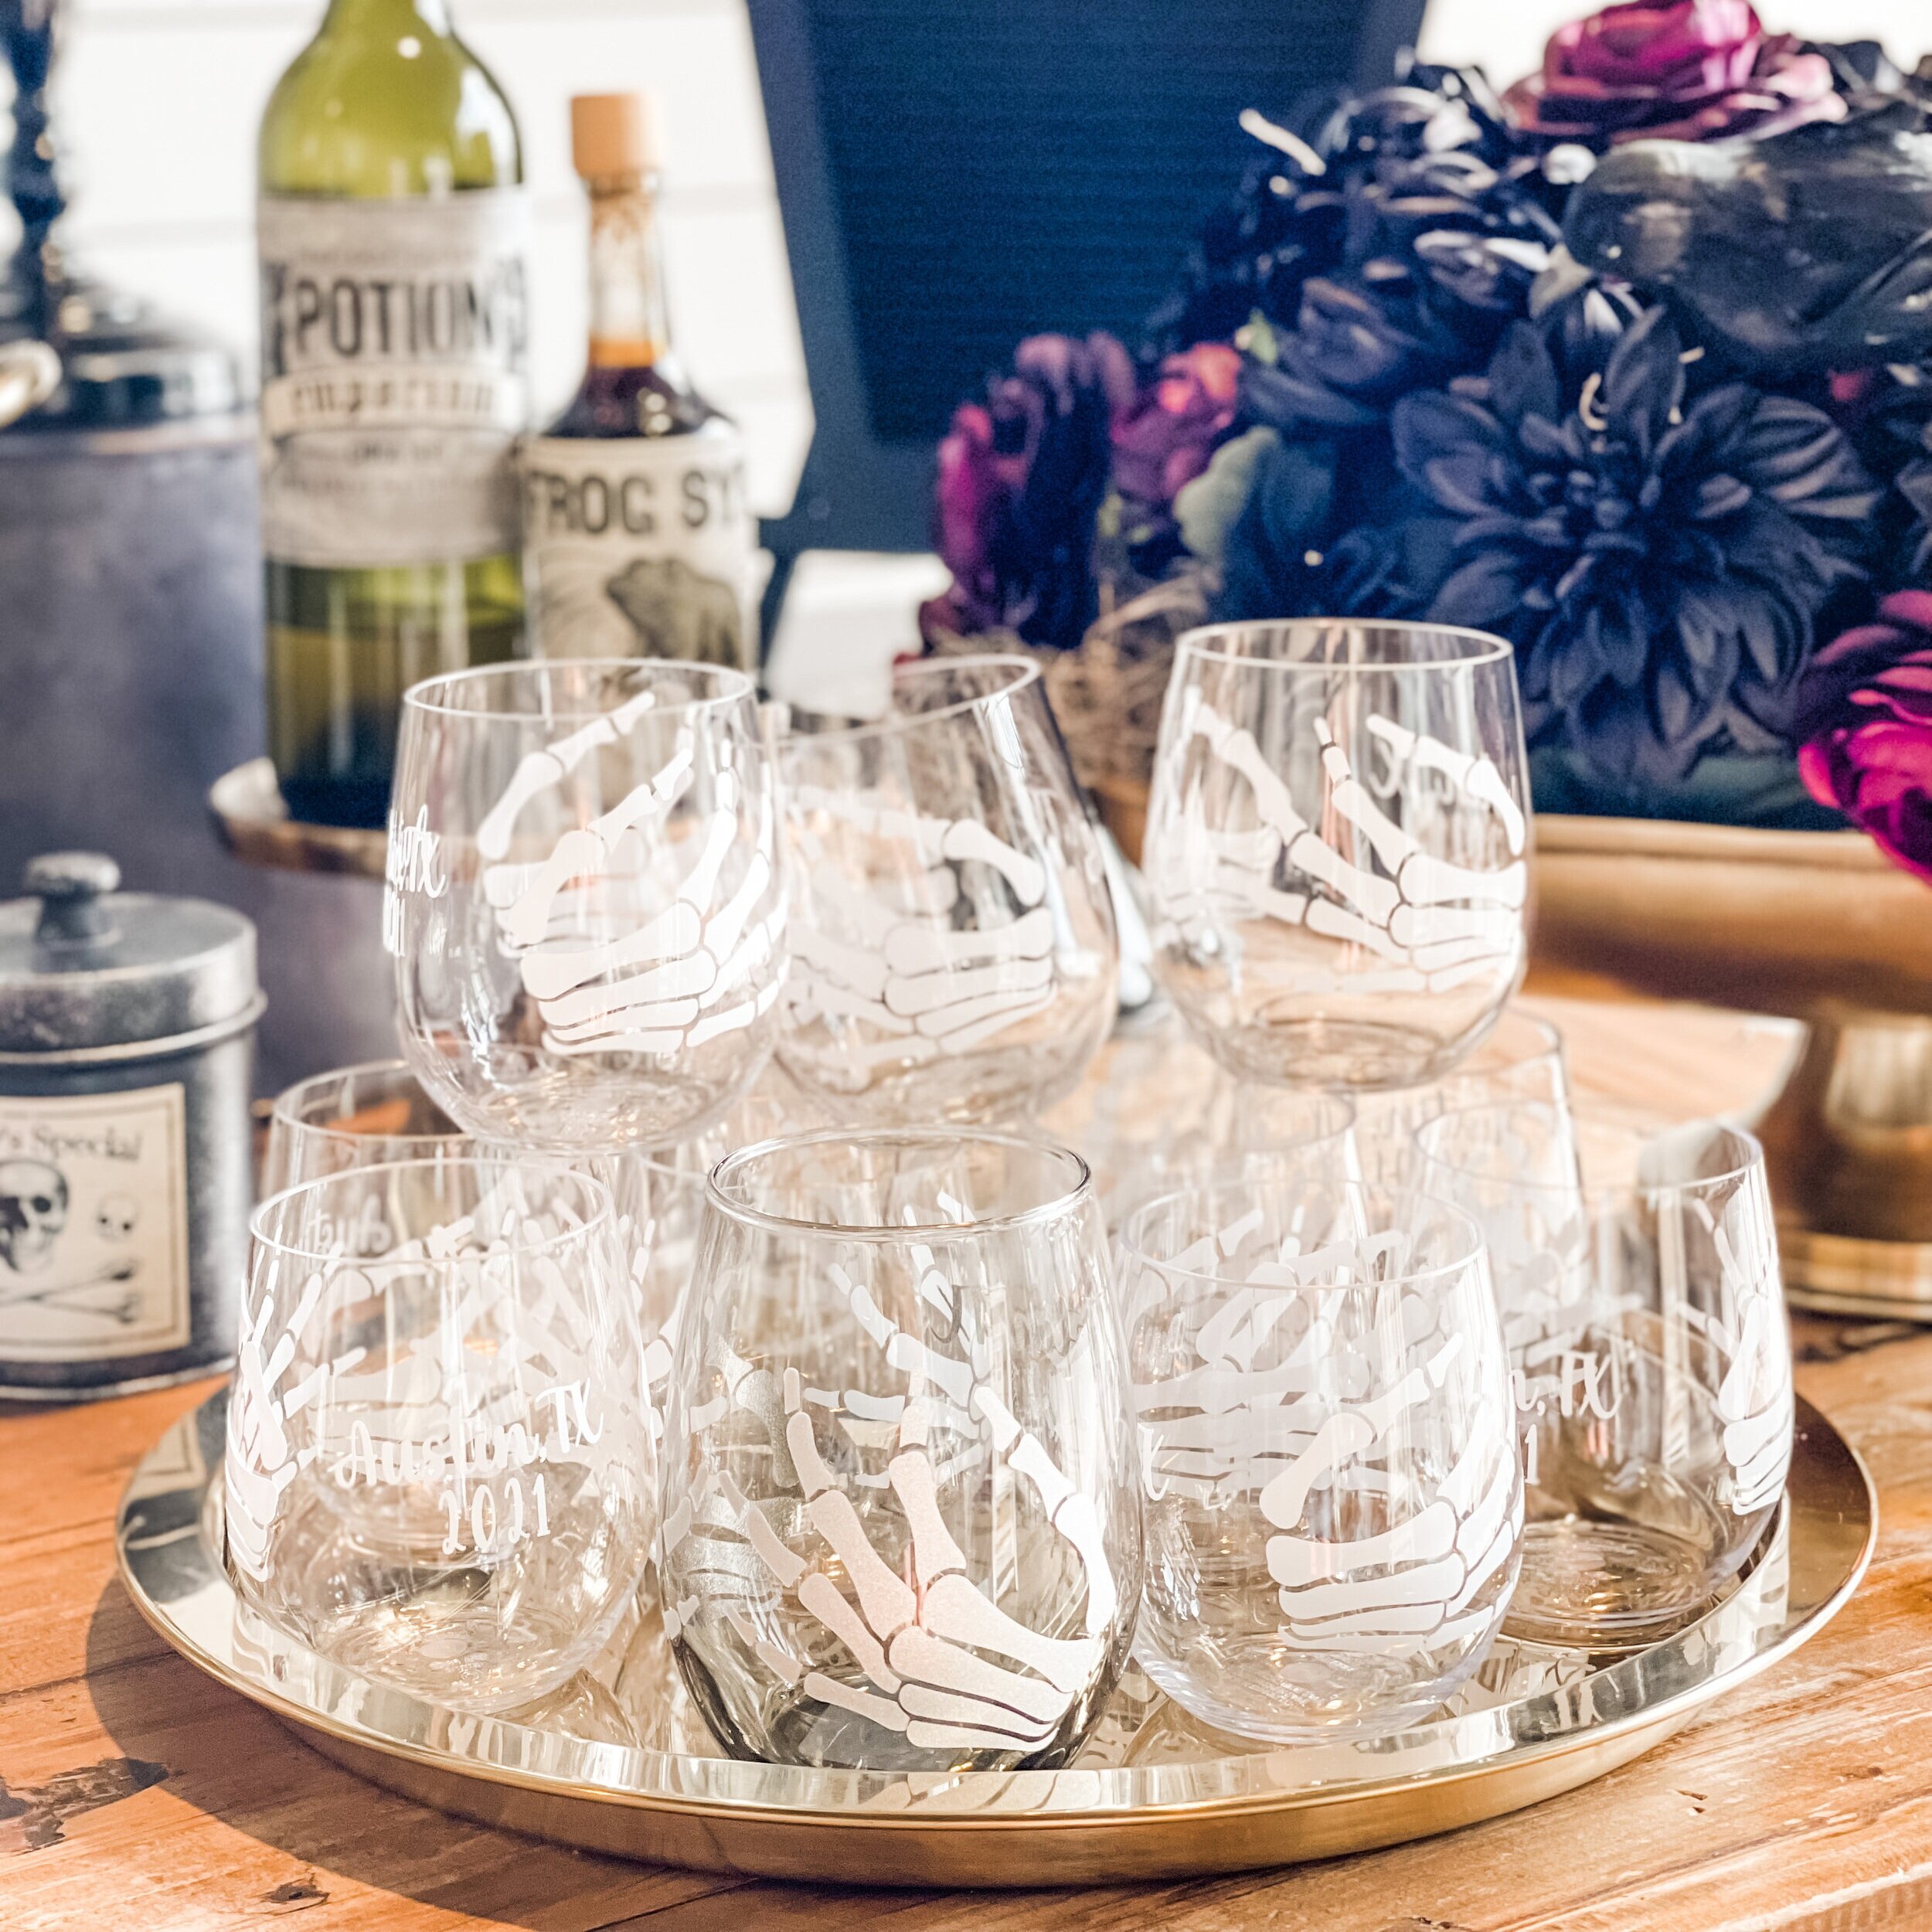 Throw a fun “Death to my Twenties” 30th Birthday Party with personalized skeleton wine glasses! Get ideas for welcome area, food bar, decor and more now at minteventdesign.com!